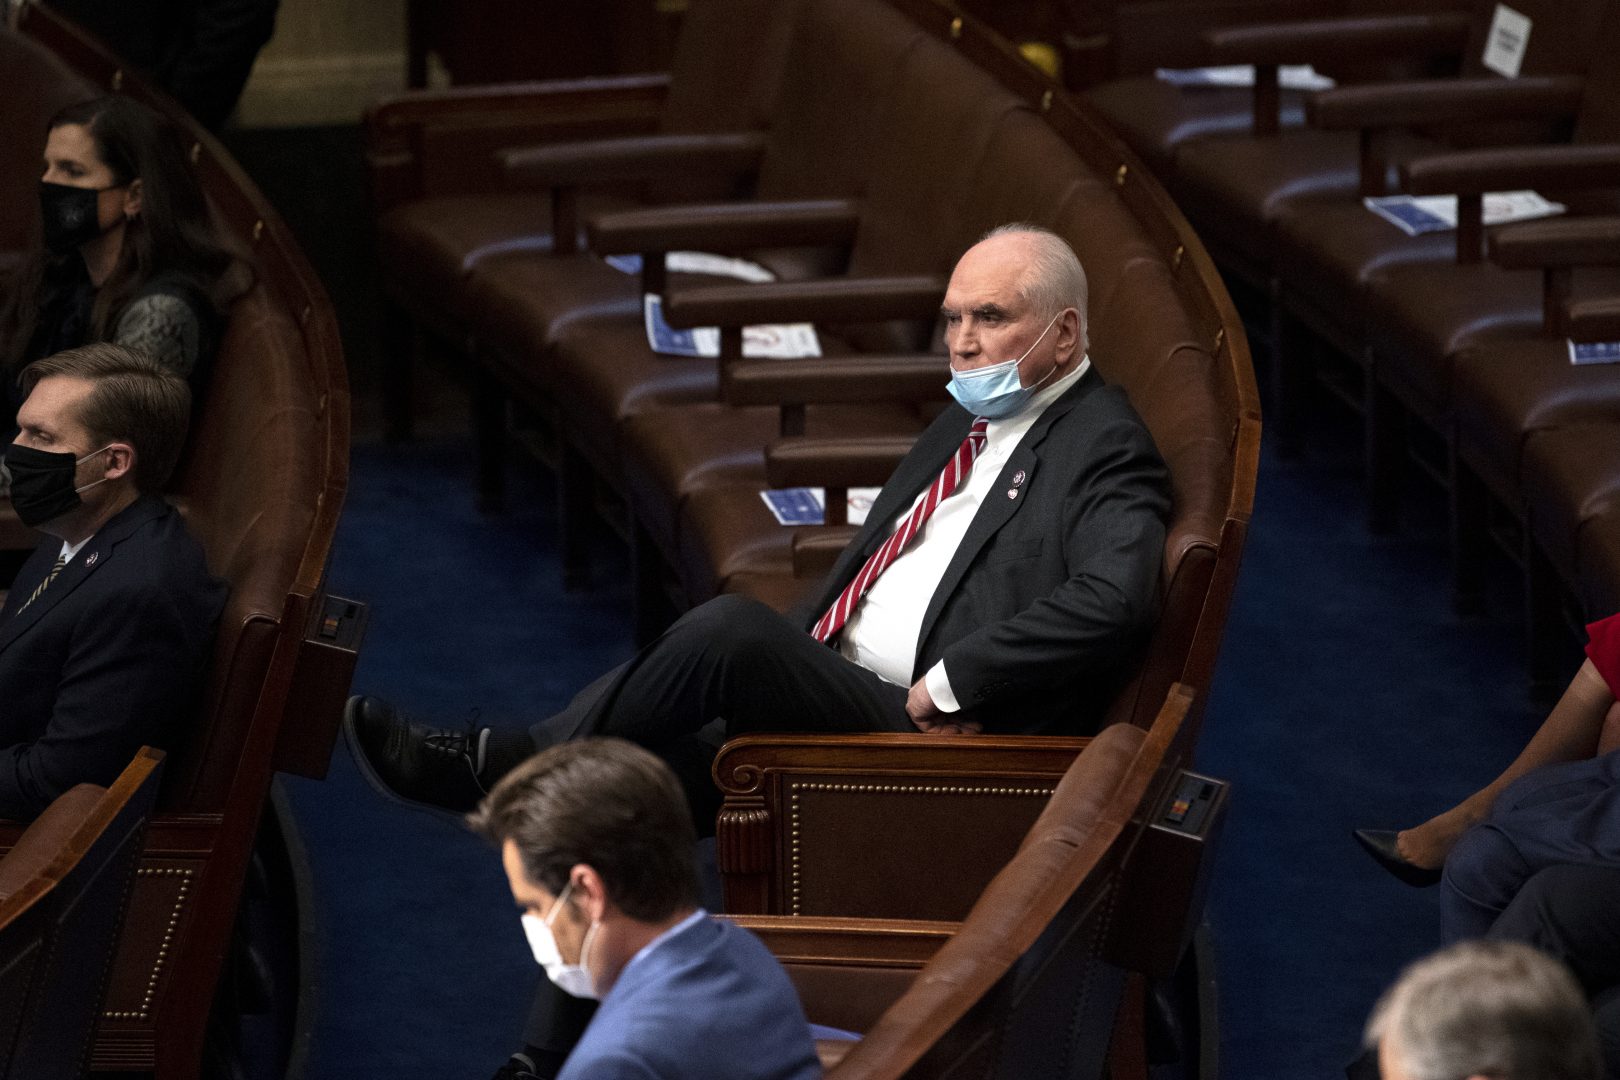 FILE PHOTO: Rep. Mike Kelly, R-Pa., looks on in the House Chamber after they reconvened for arguments over the objection of certifying Arizona’s Electoral College votes in November’s election, at the Capitol in Washington, Wednesday, Jan. 6, 2021. Six weeks earlier, Kelly, an ally of President Trump, had filed a lawsuit that, had it been successful, would have canceled the legally cast votes of more than 2 million Pennsylvanians.